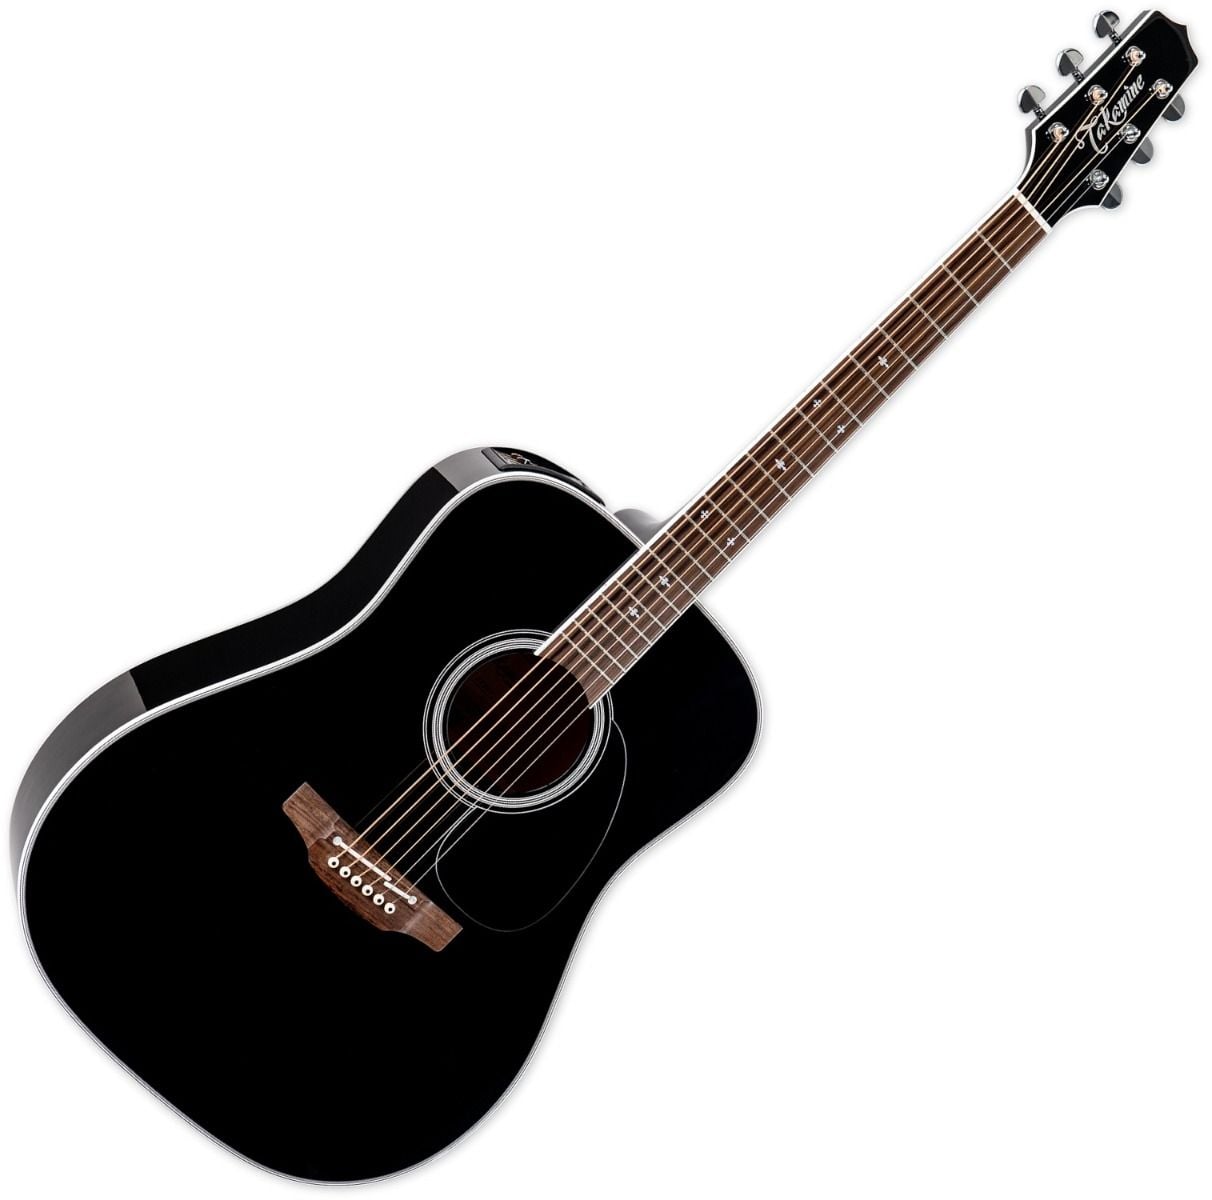 Takamine FT341 Limited Dreadnought Acoustic Guitar - FT341 